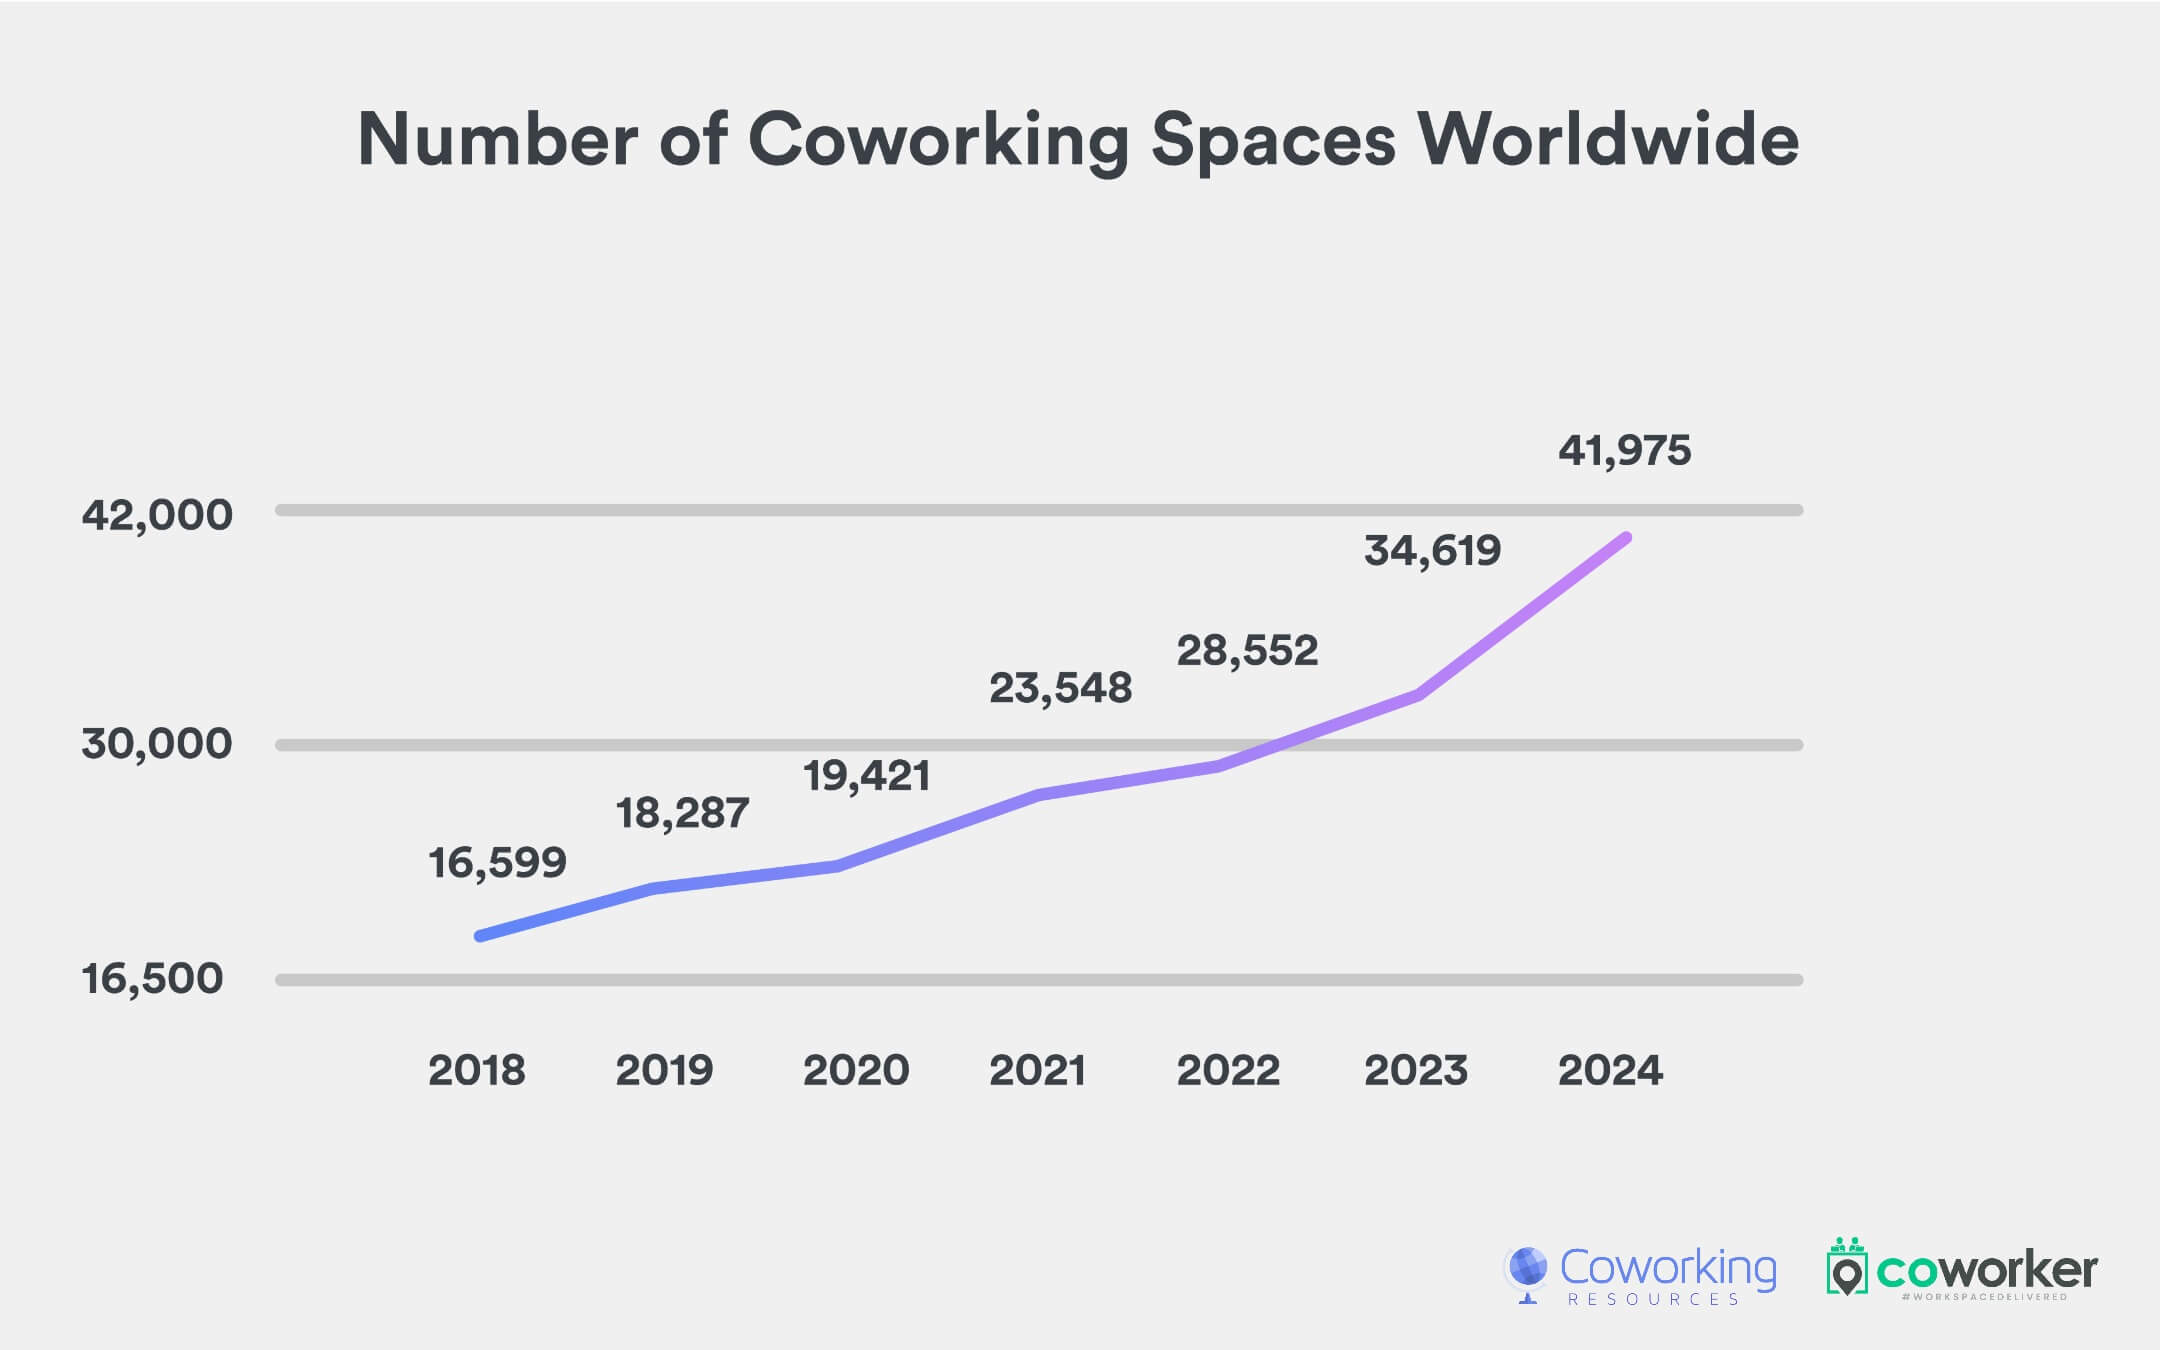 Number of coworking spaces worldwide (2018-2024)